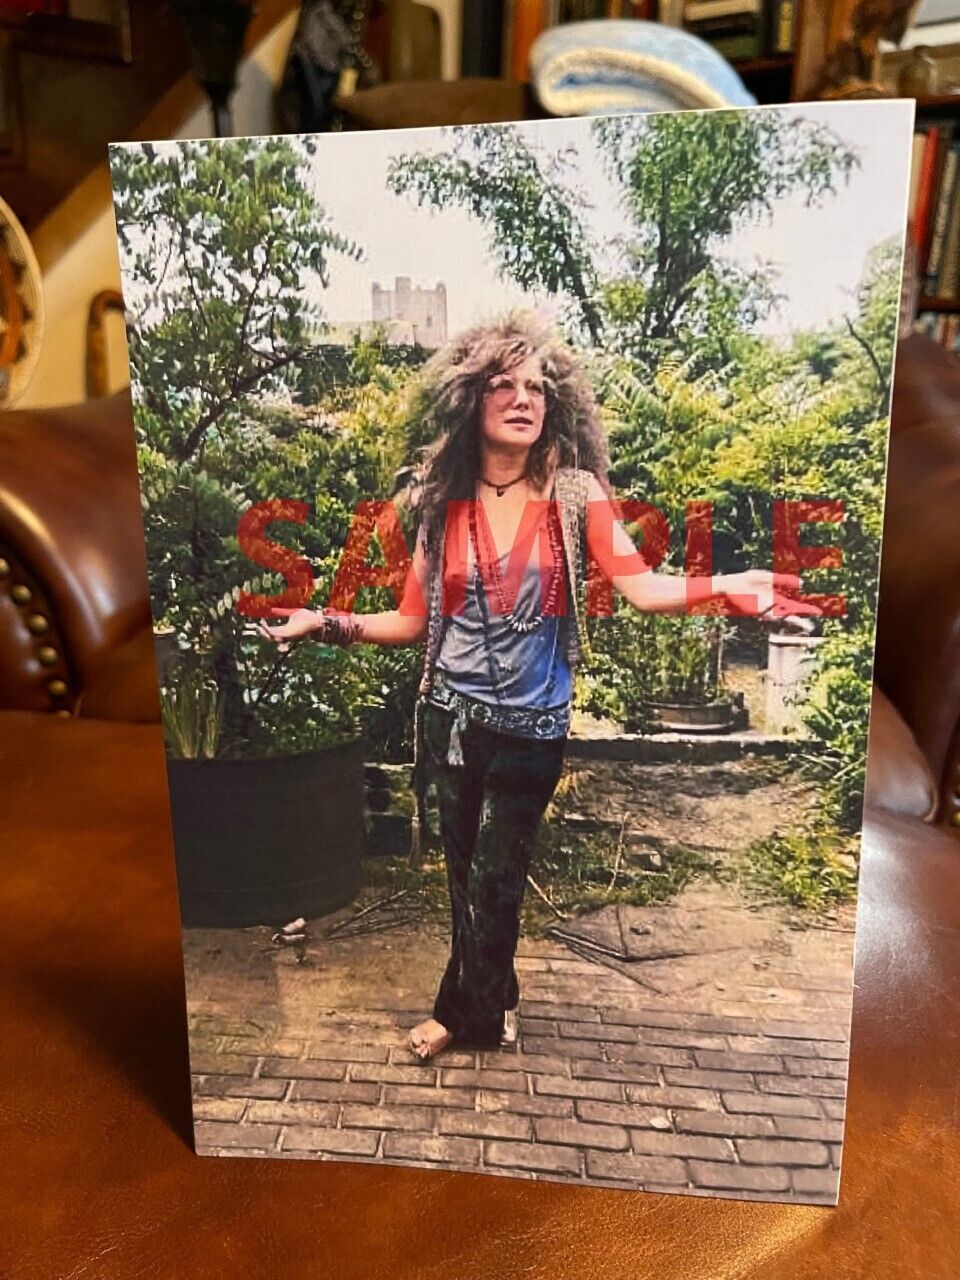 Janis Joplin Rock And Roll Star Outdoors  Photo Tabletop Standee 7" X 10 1/2"